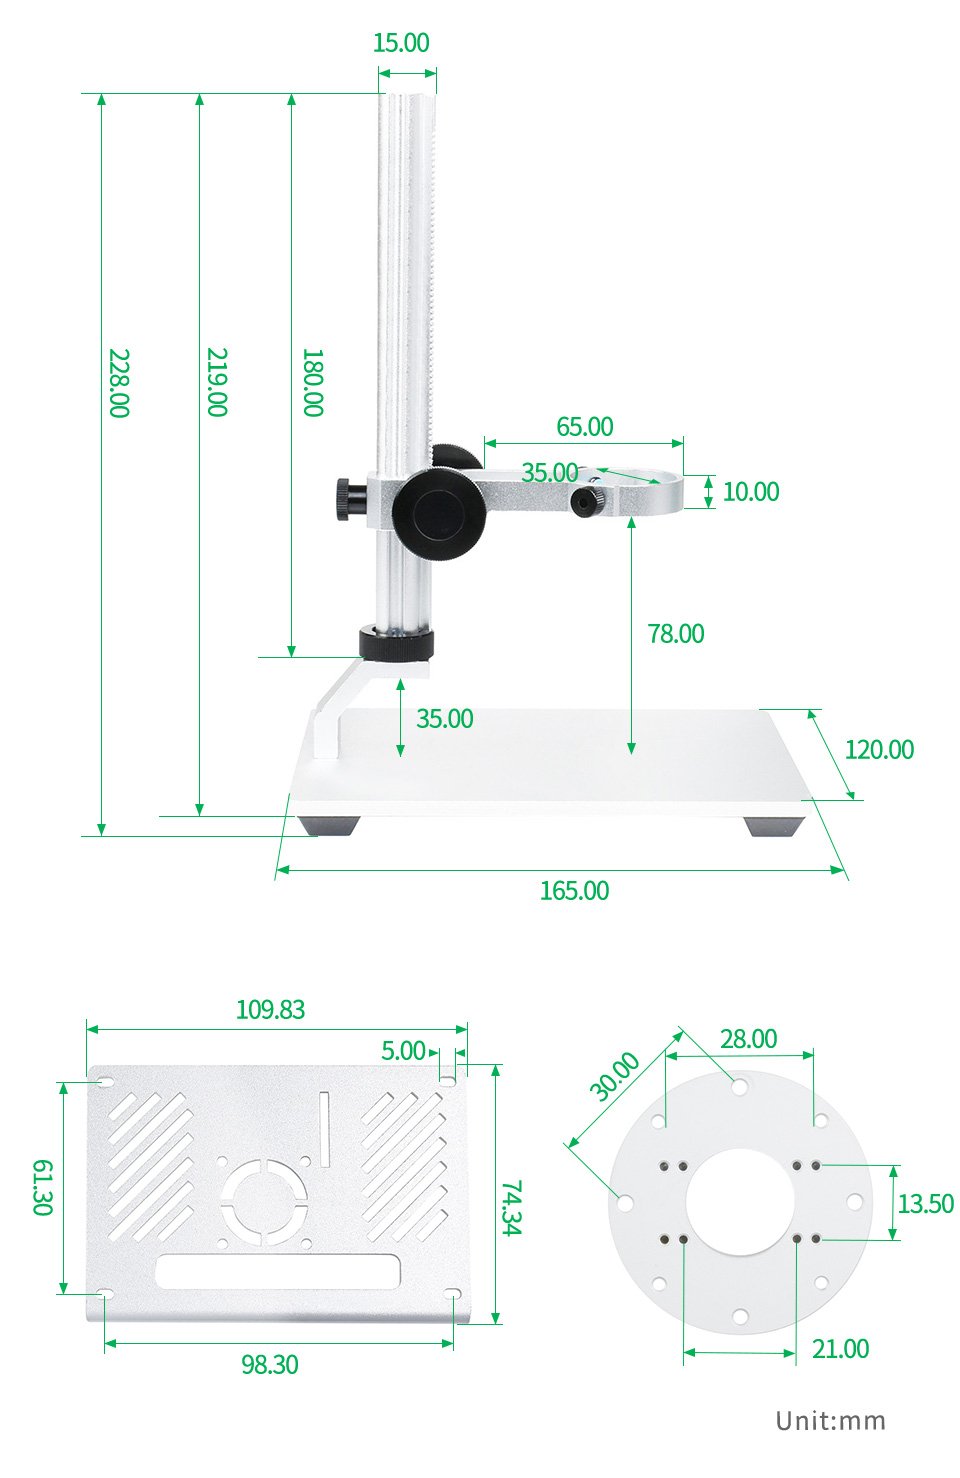 The dimensions of the microscope holder